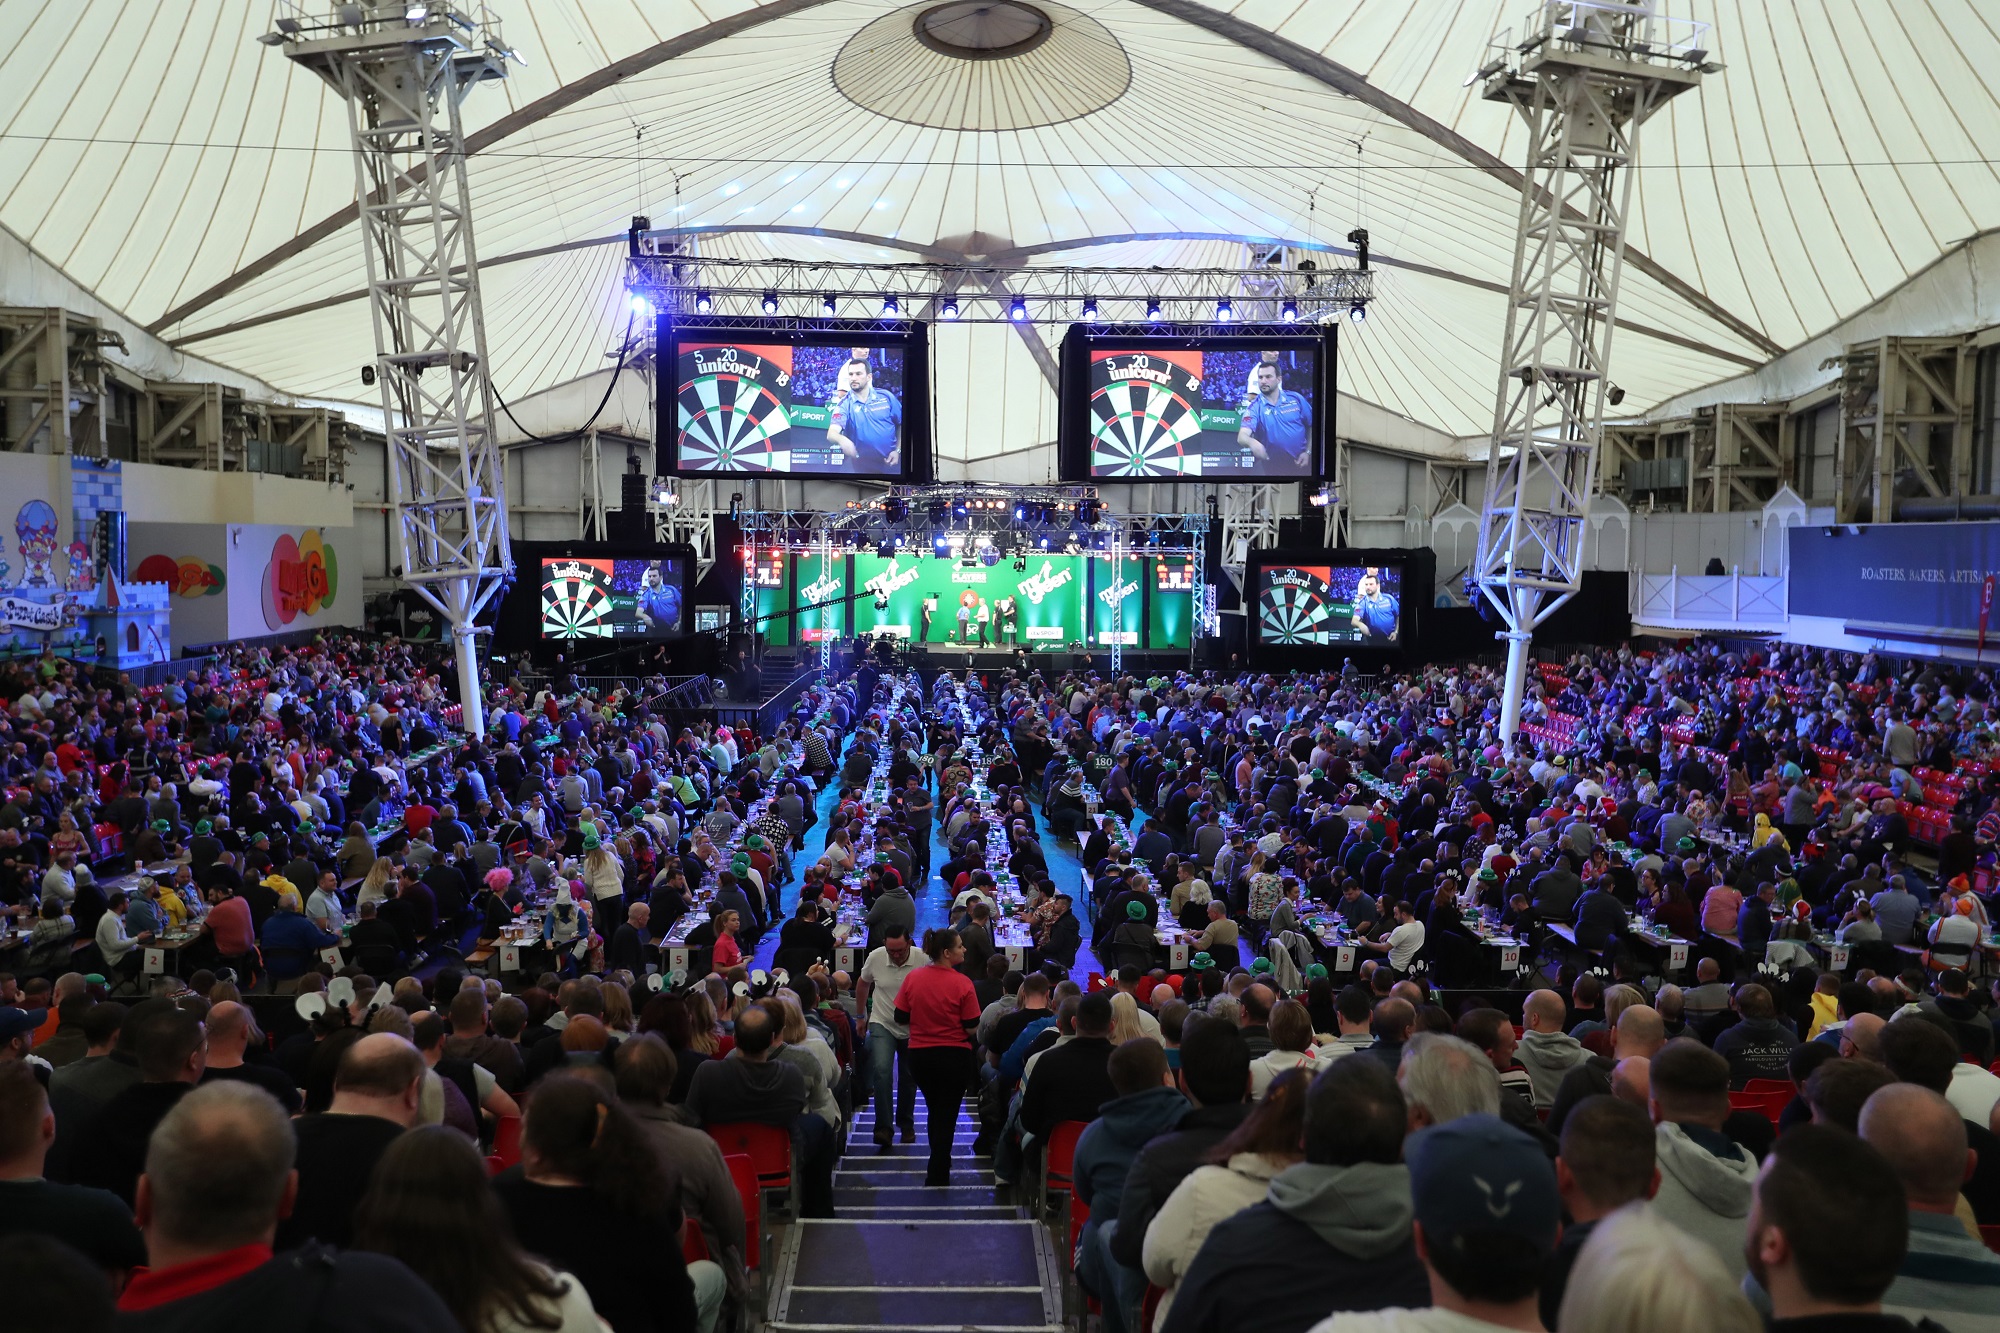 Players Championship Finals to be behind closed doors